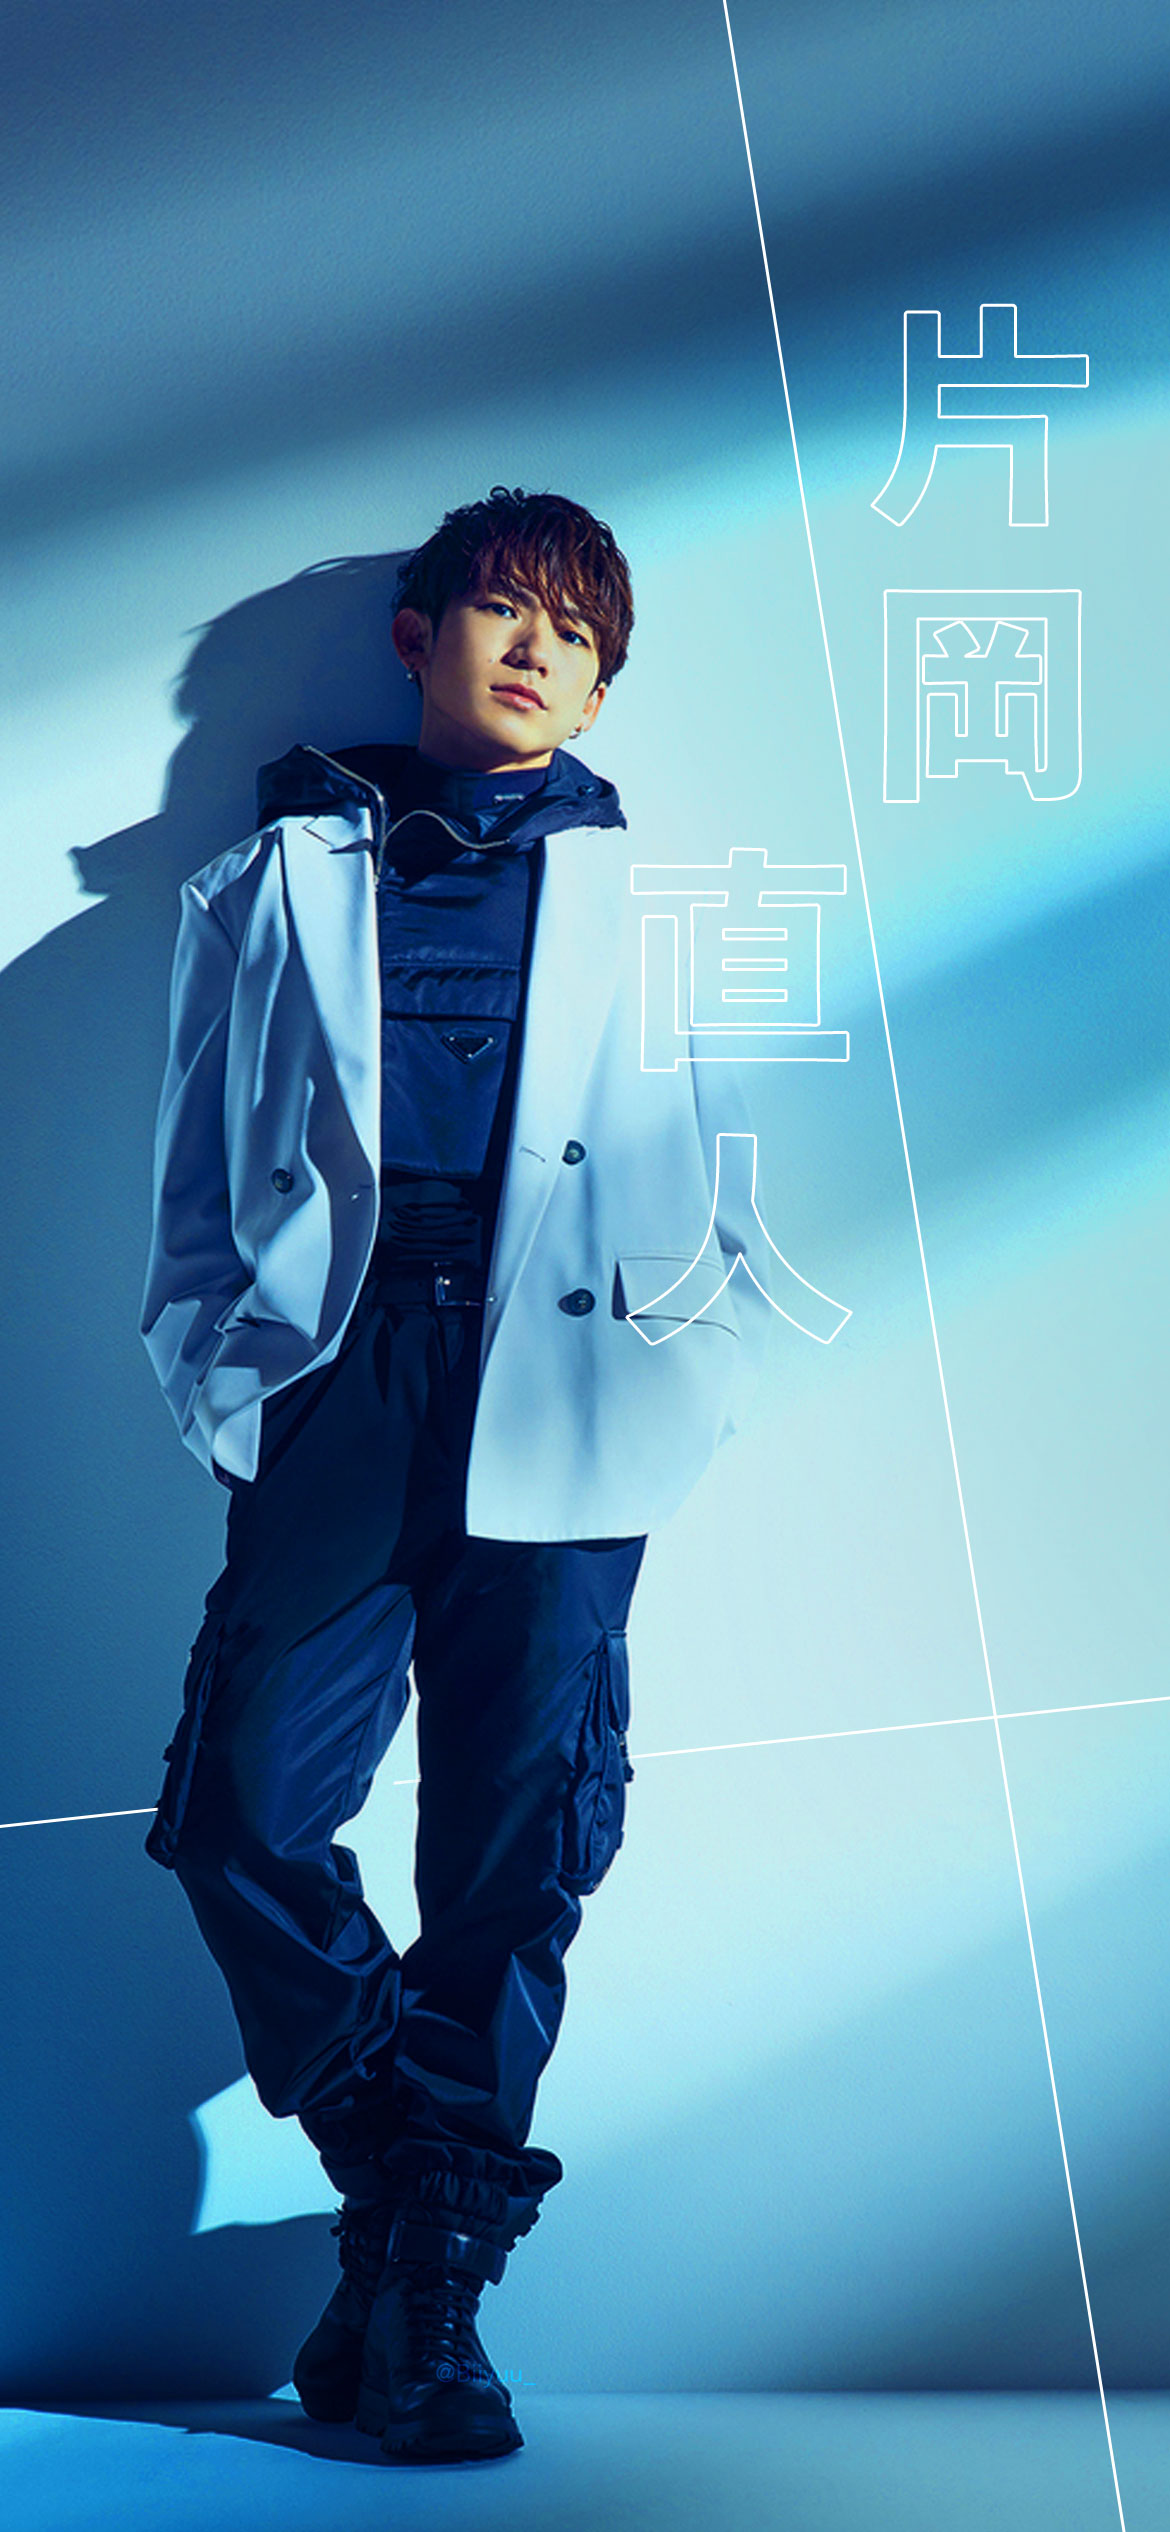 Naowhat リプってなに Exile Paradoxの壁紙 Last 2 Naoki Amp Shokichi 1170 X 2532 Note I M Open To Help To Move Any Text Or Lines